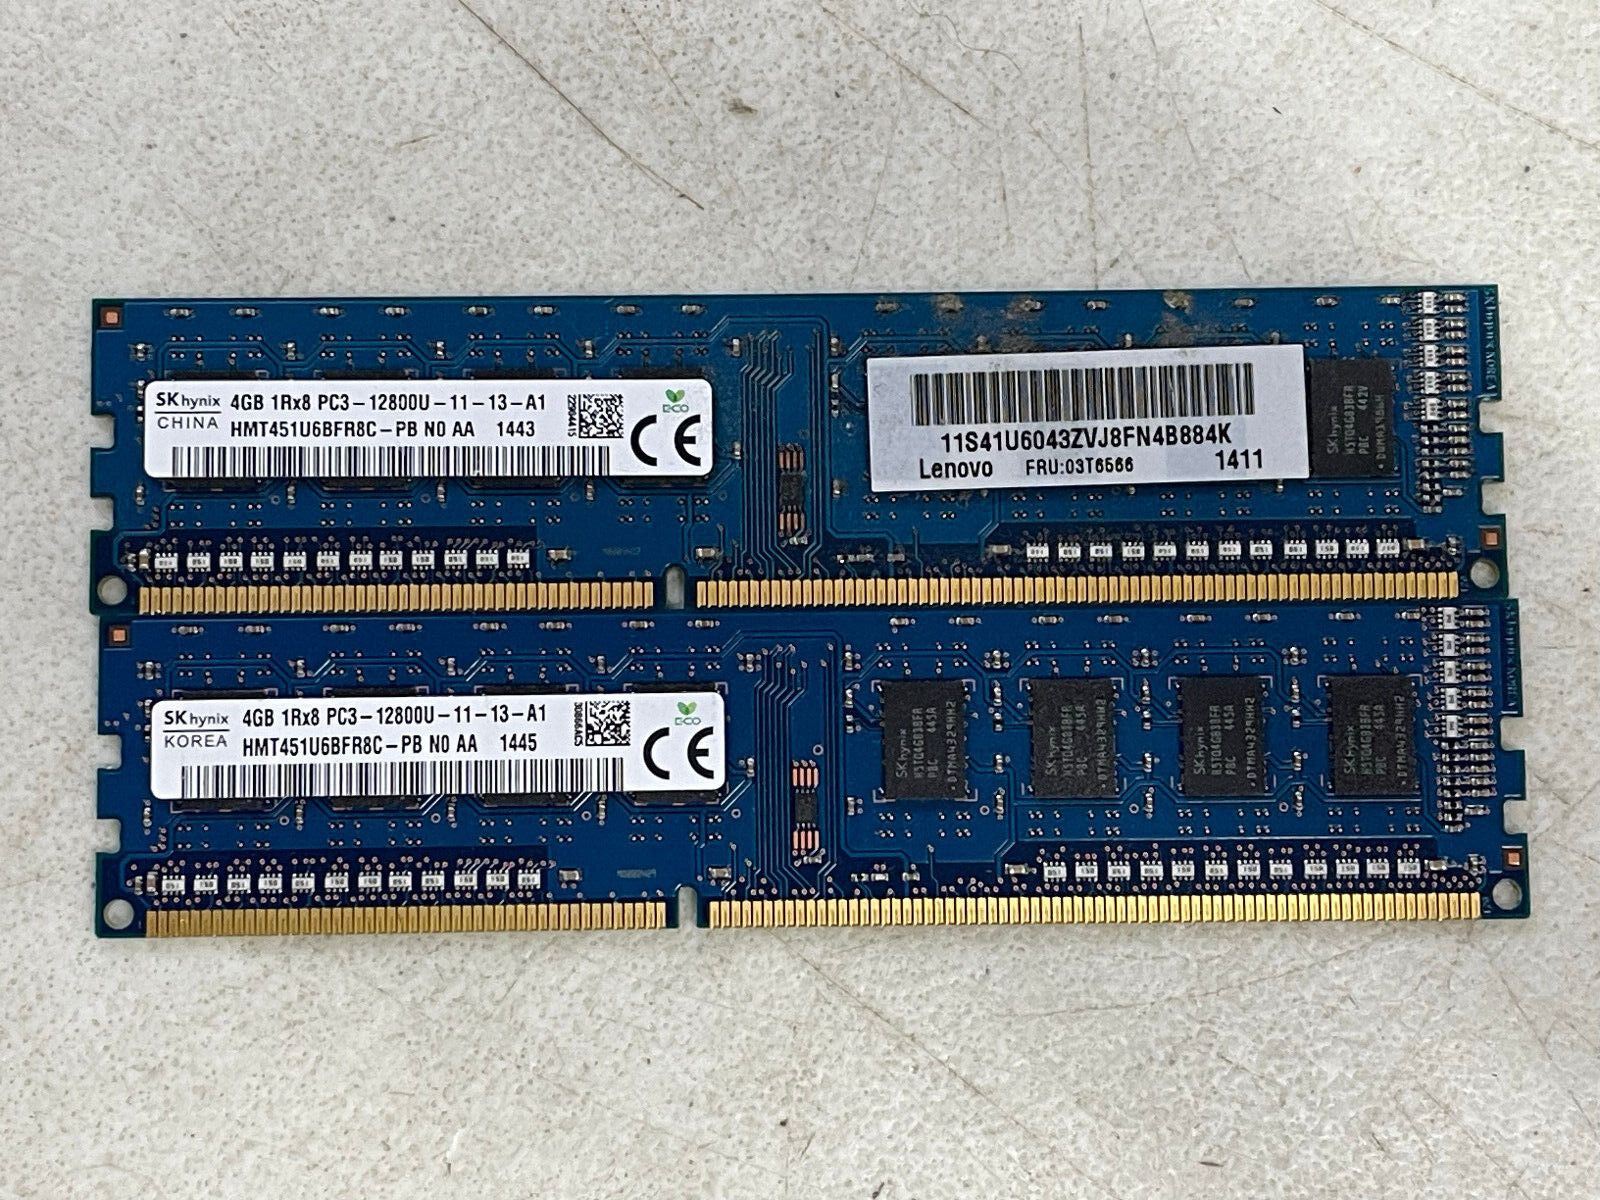 SK hynix 4GB 1Rx8 PC3-12800U DIMM | HMT451U6BFR8C-PB | 8GB Total (Lot of 2)